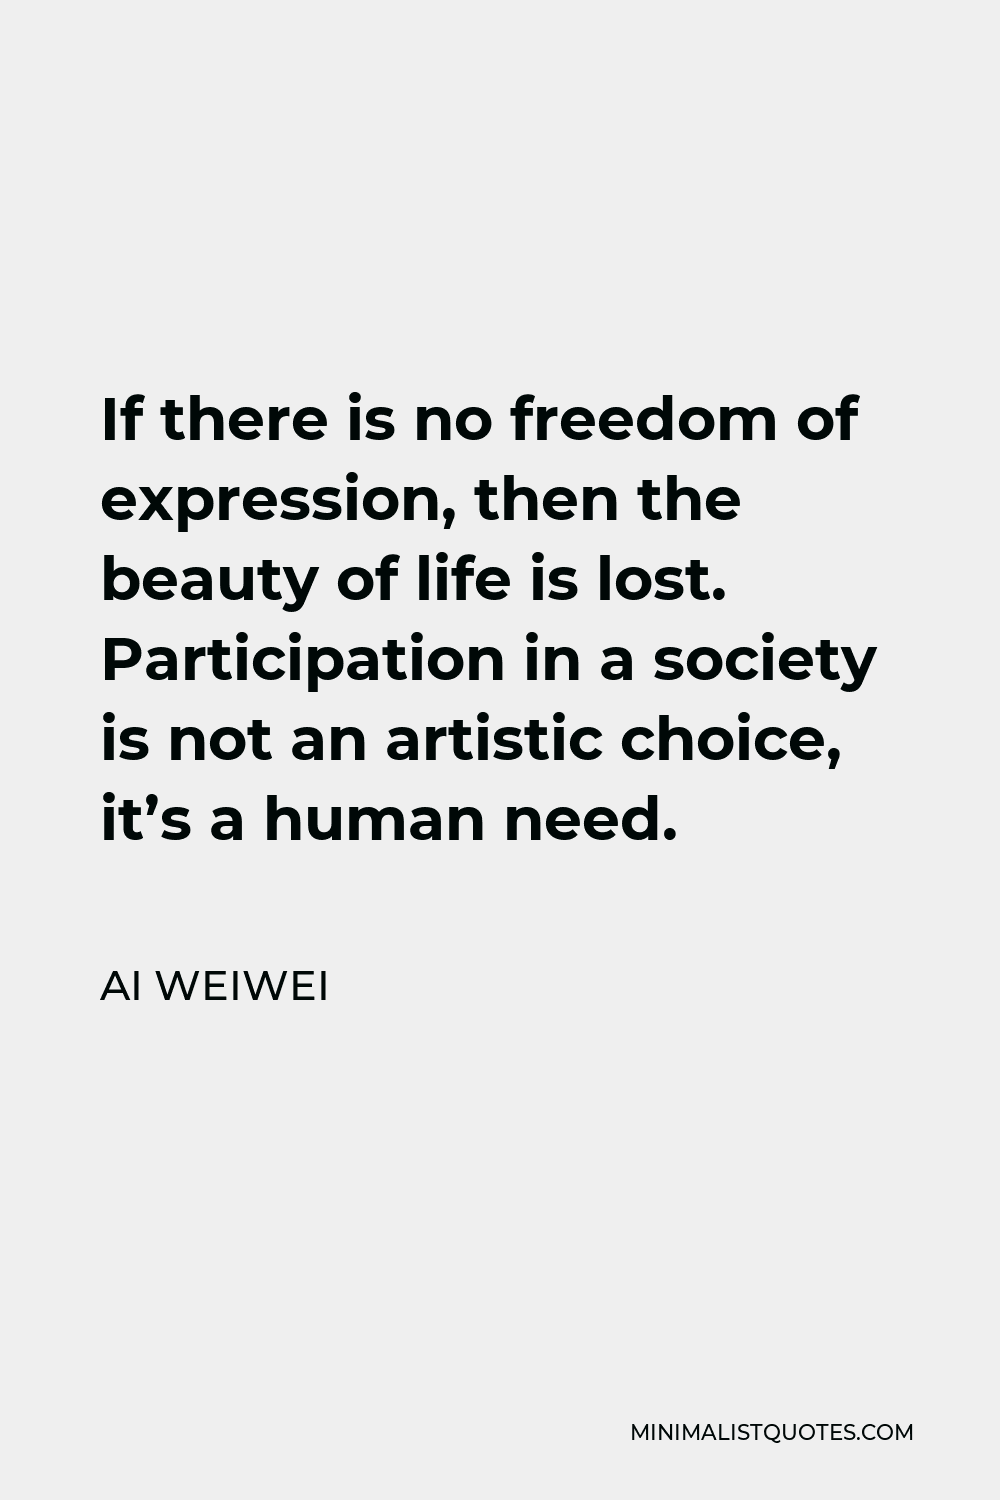 Ai Weiwei Quote - If there is no freedom of expression, then the beauty of life is lost. Participation in a society is not an artistic choice, it’s a human need.